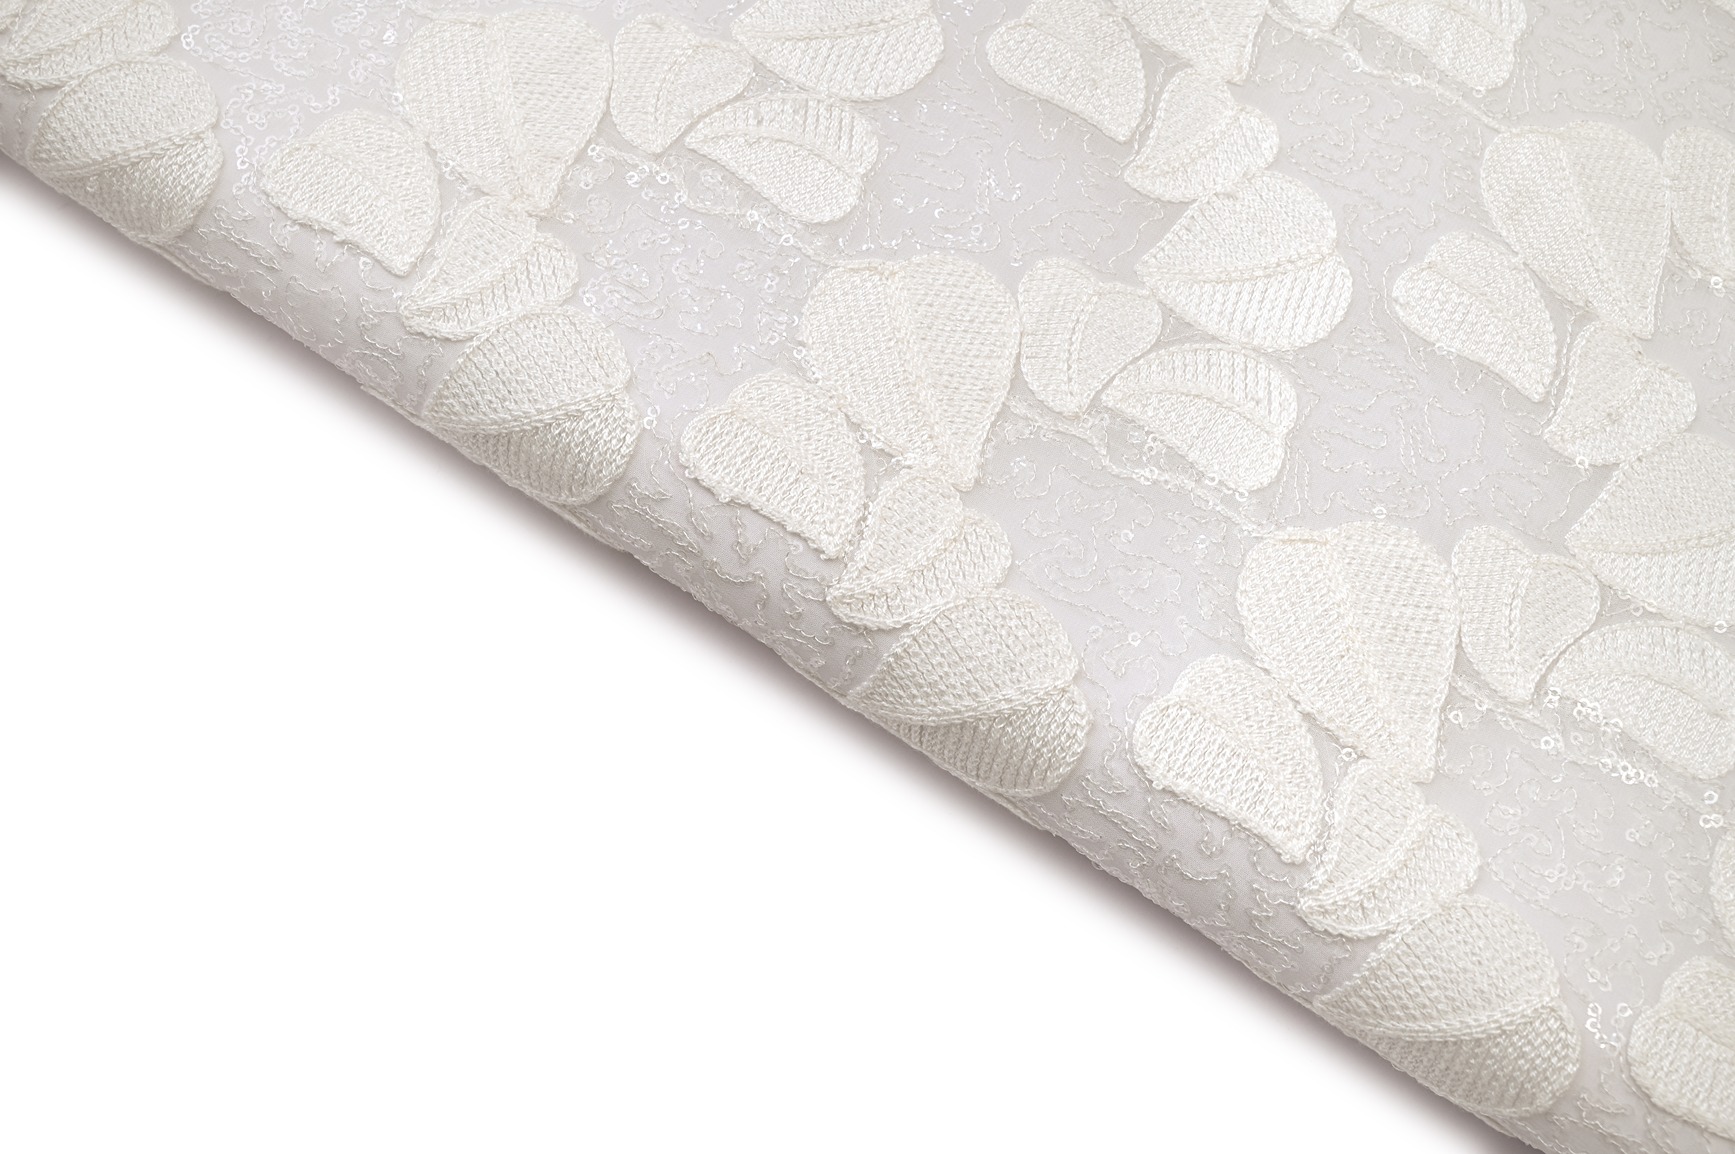 DIABLE WHITE COLOR WATER SEQUANCE & LEAF SHAPE APLIQUE MOTIVE PATTERN EMBROIDERED FABRIC 10631